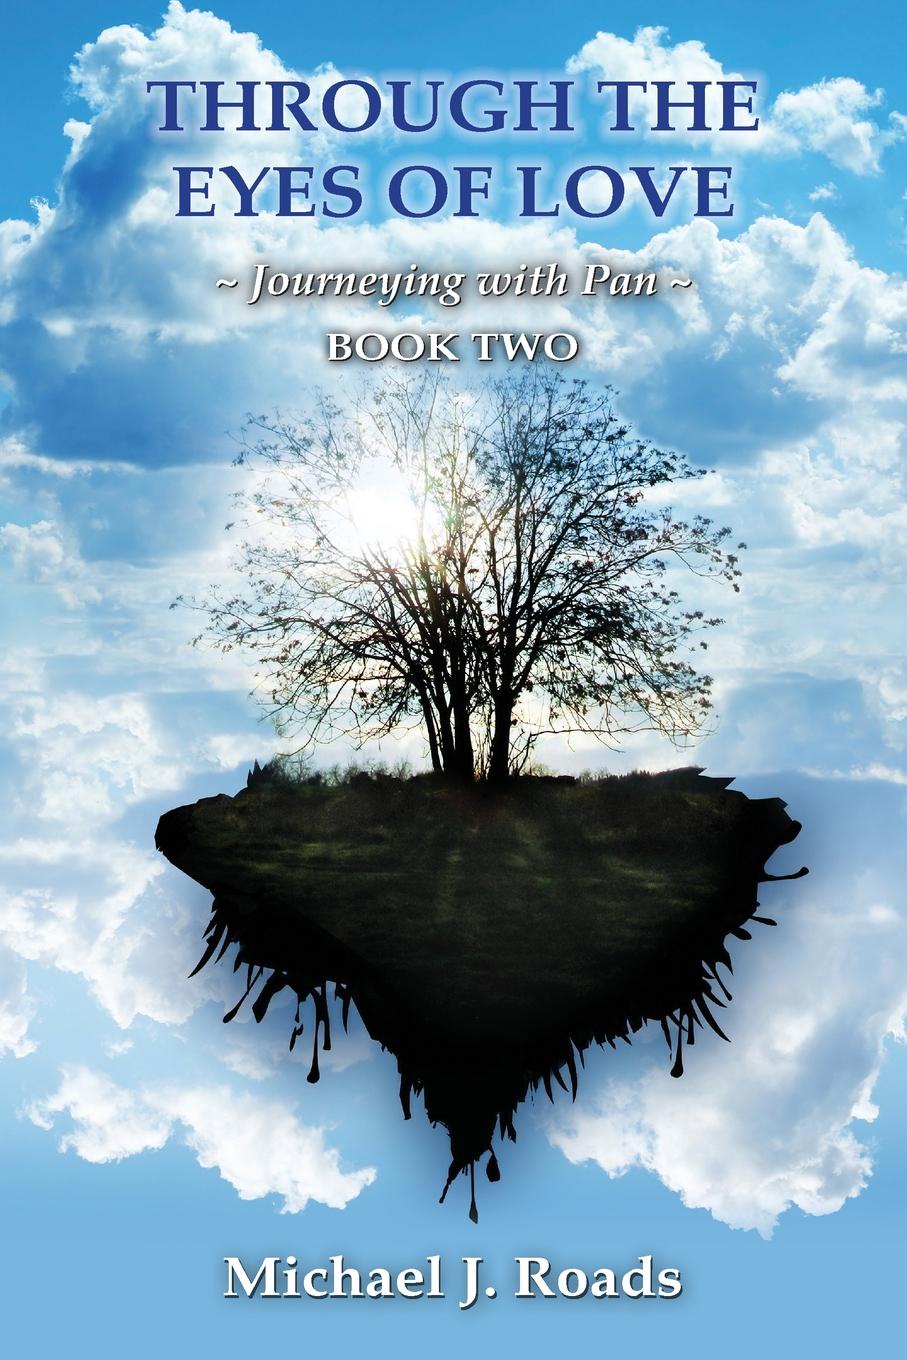 Through the Eyes of Love. Journeying with Pan, Book Two